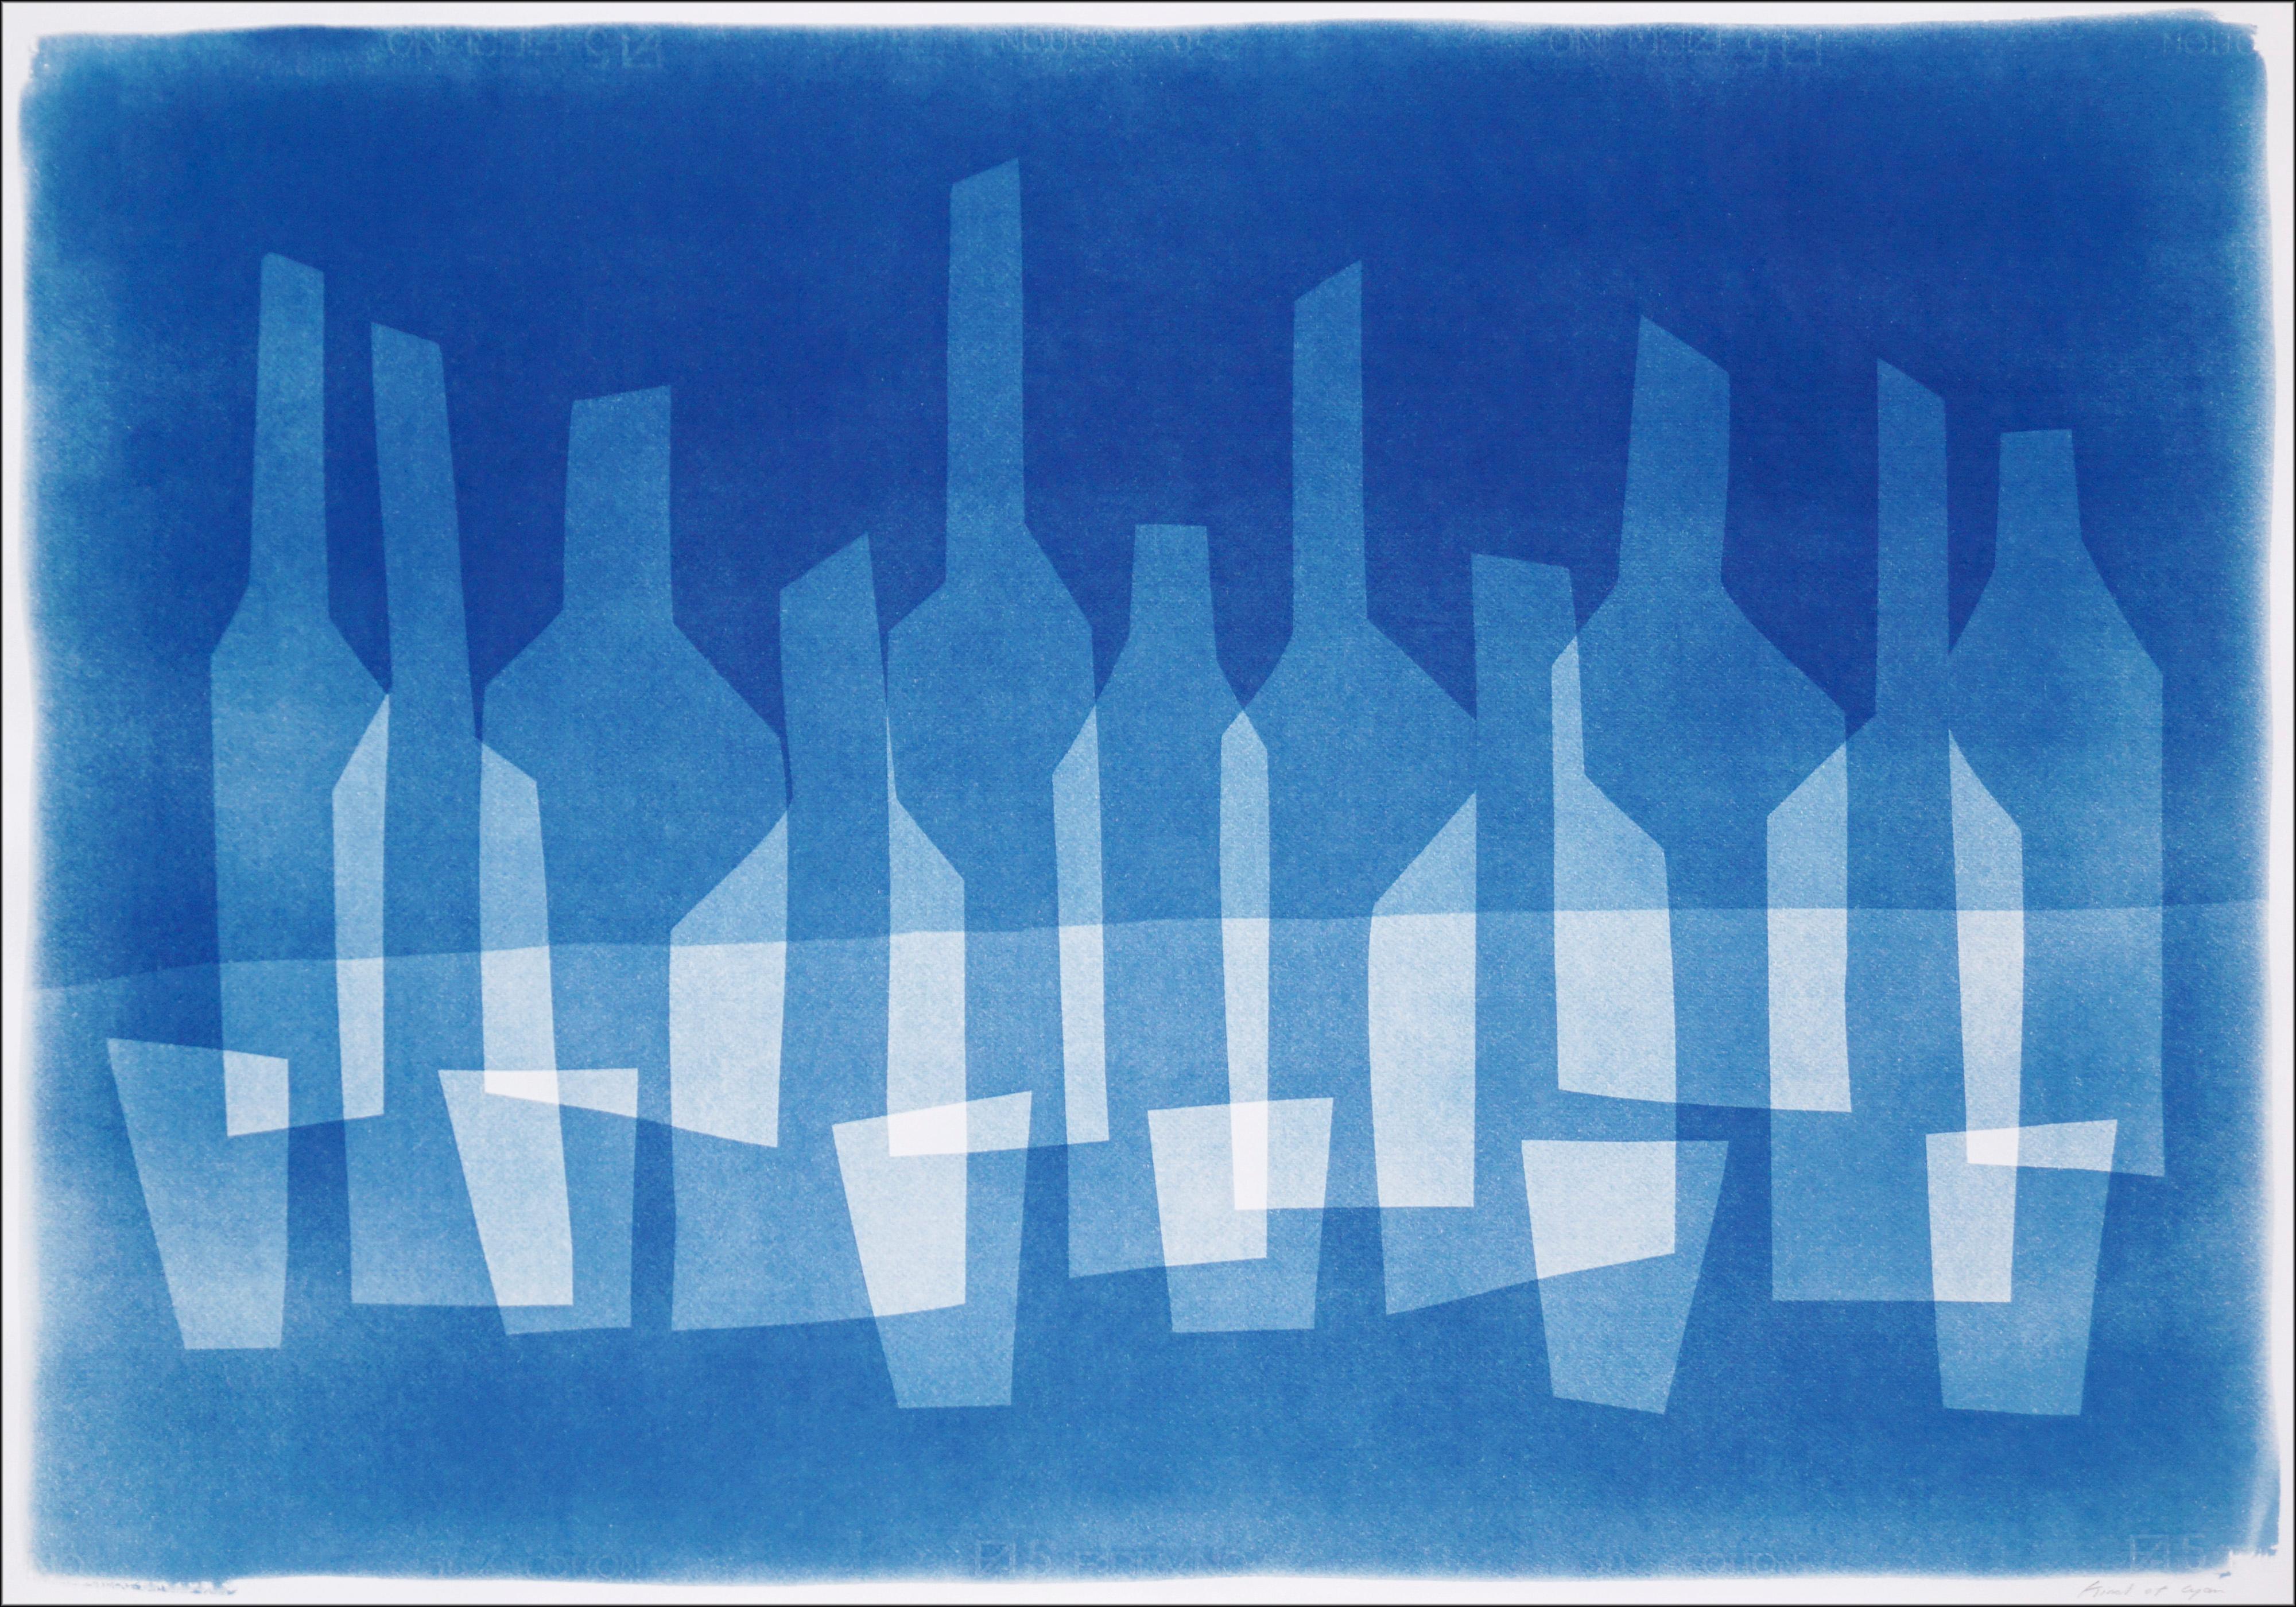 Kind of Cyan Still-Life Print - Double Vision Bar Scene, Still Life Wine Bottles and Glass, Blue Tones Monotype 